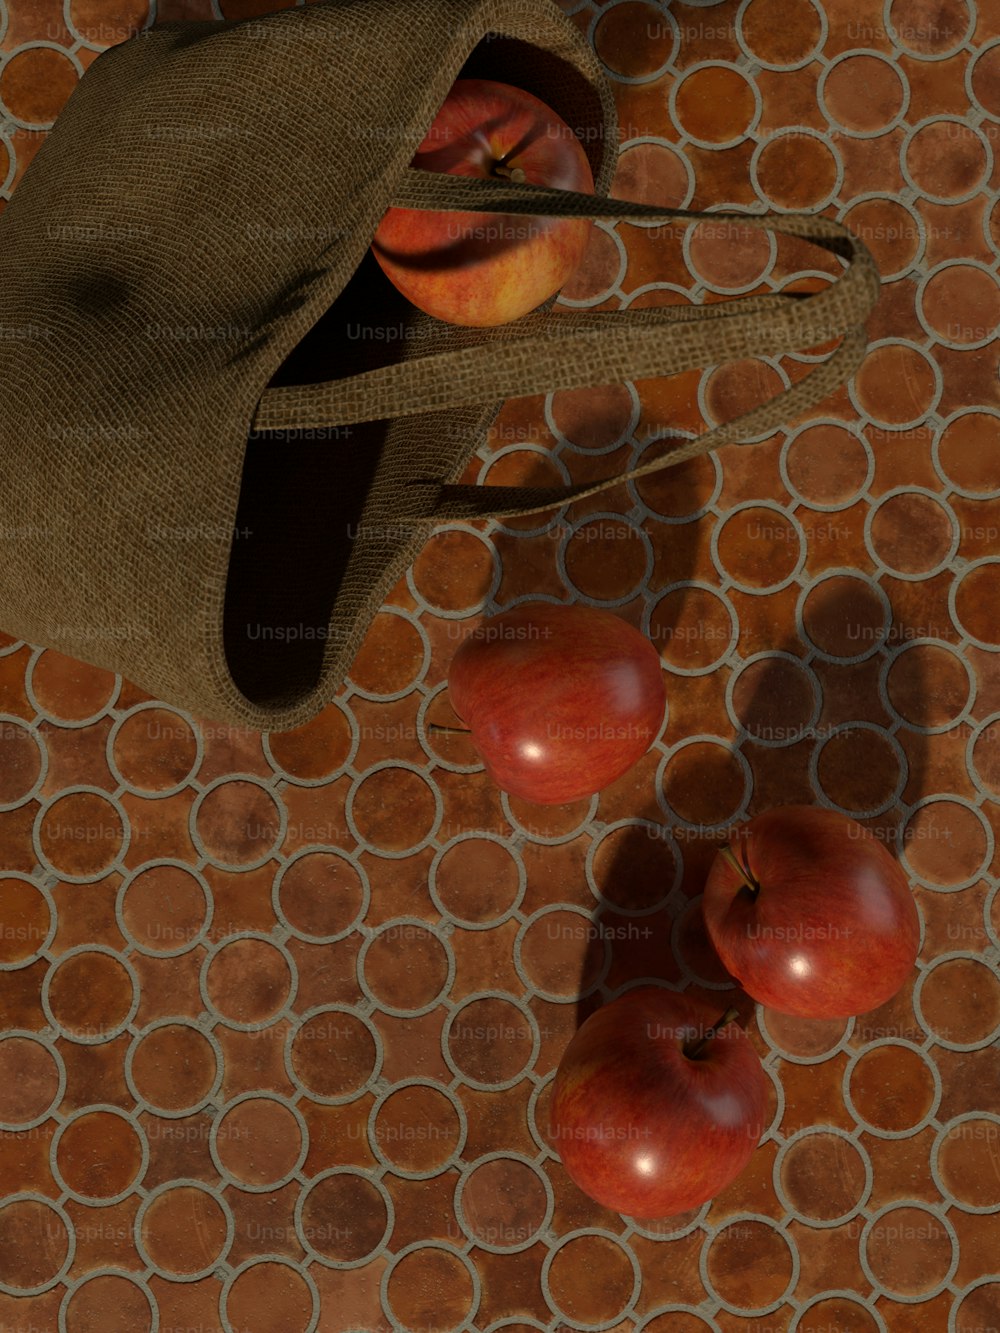 a hat and some apples on a tile floor